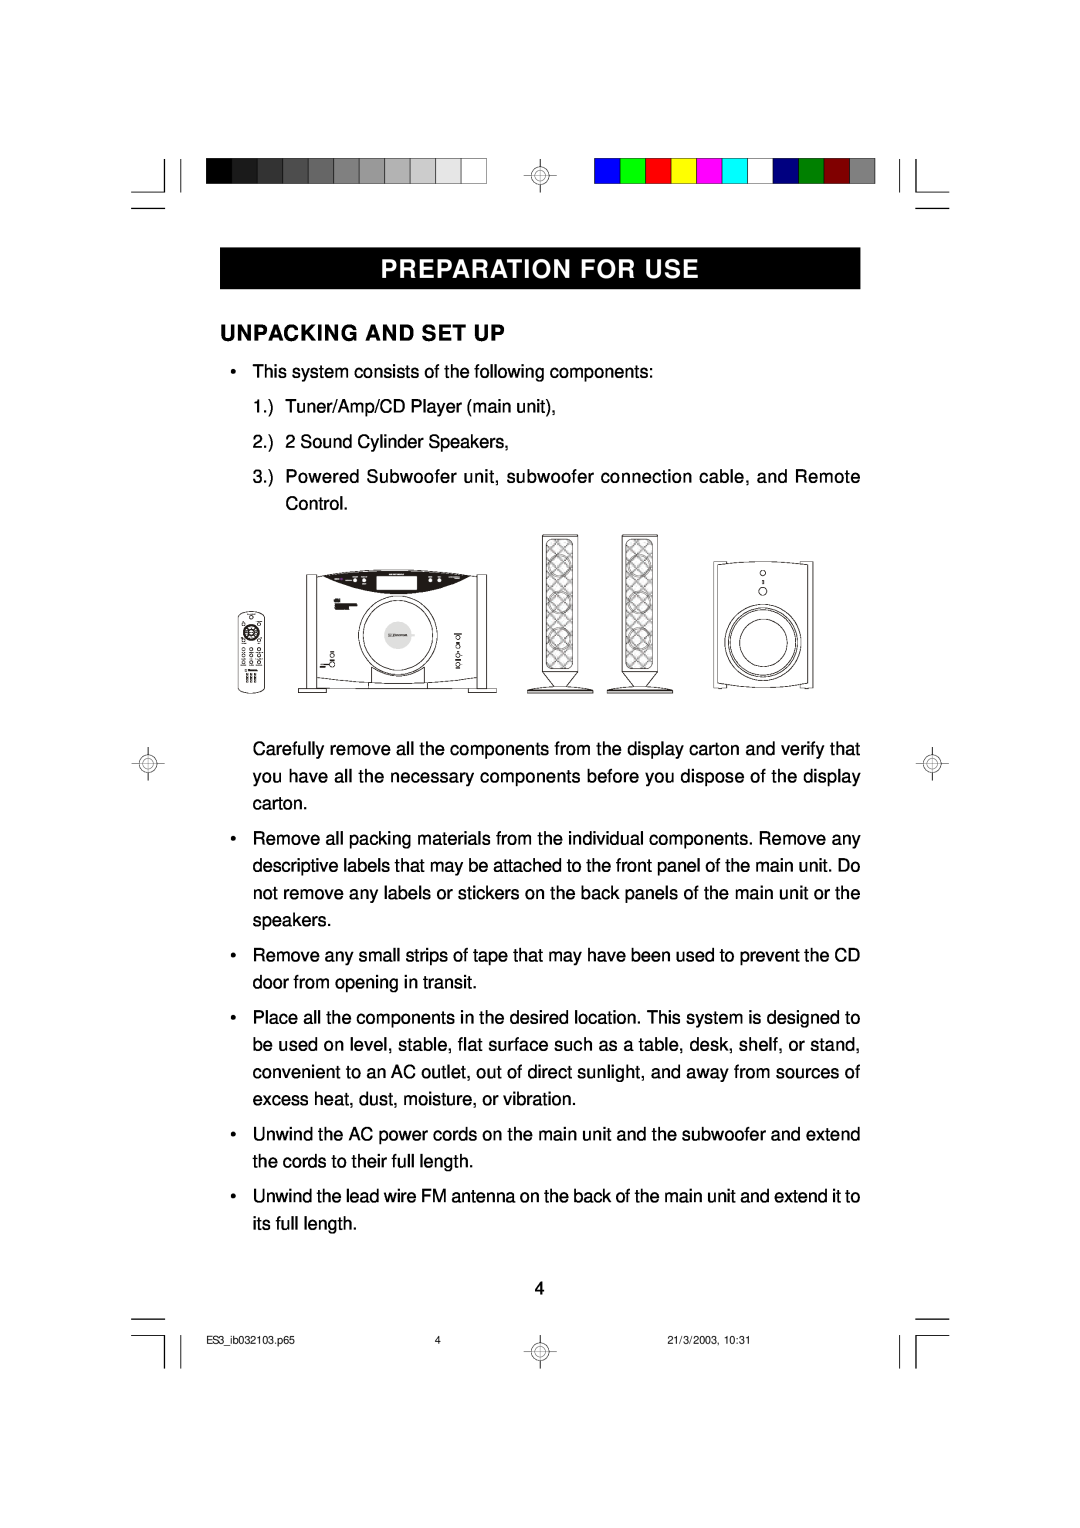 Emerson ES3 owner manual Preparation For Use, Unpacking And Set Up 